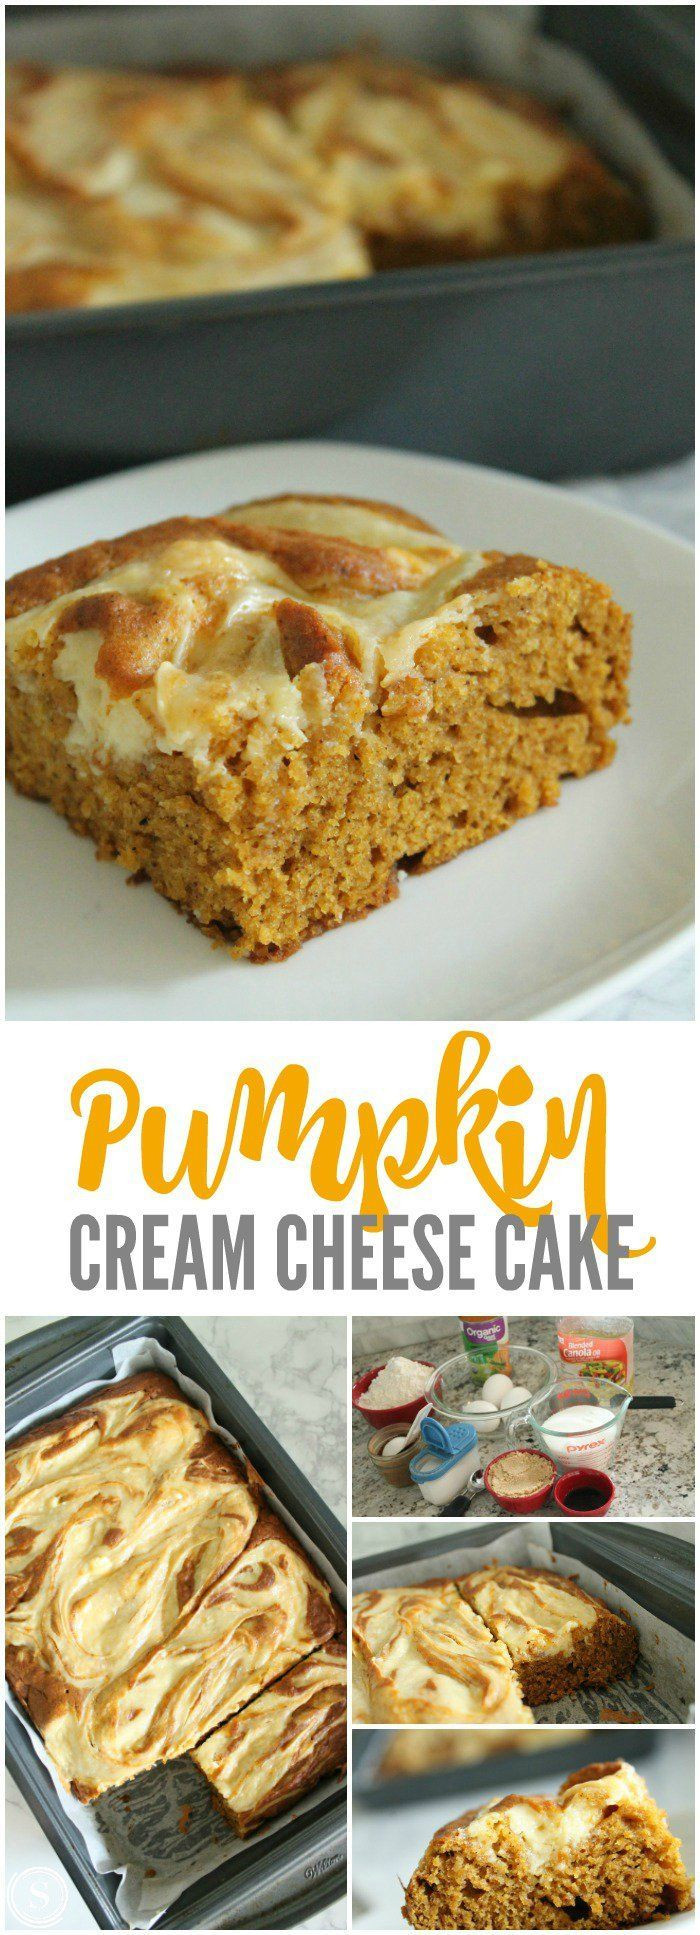 Fall Pumpkin Recipes
 17 Best images about Fall Recipes on Pinterest